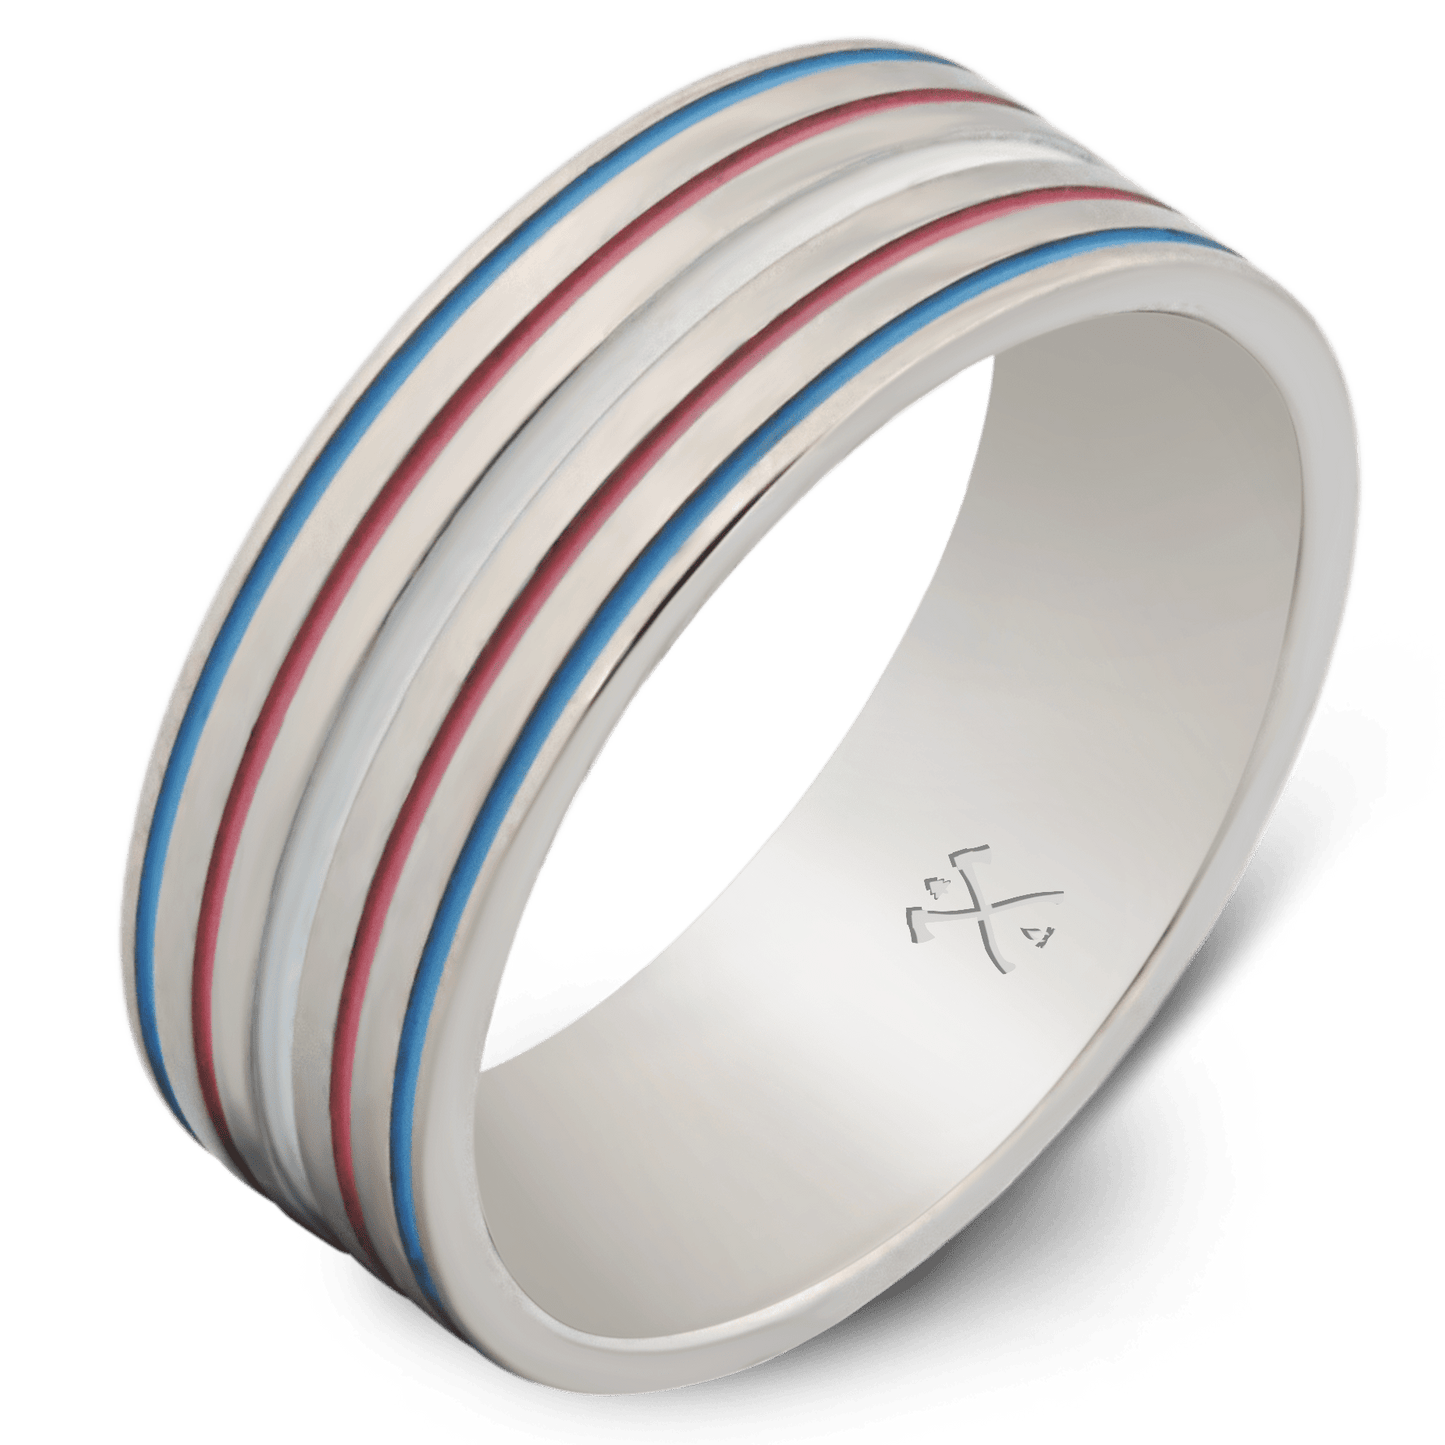 The Dillon - Men's Wedding Rings - Manly Bands